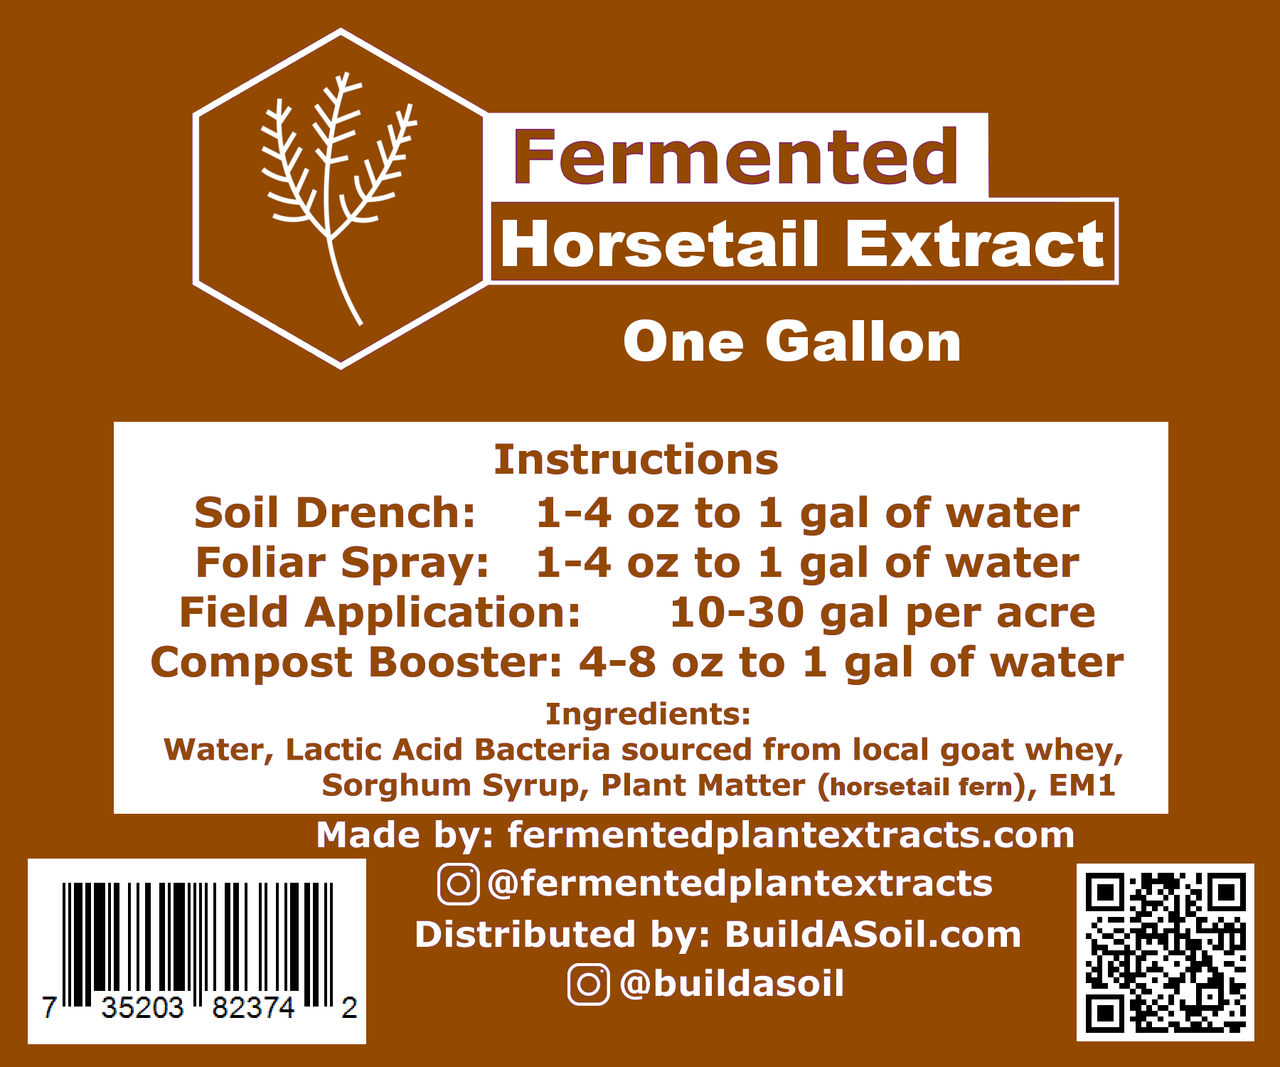 Fermented Plant Extracts: Fermented Horsetail Extract - Seasonal